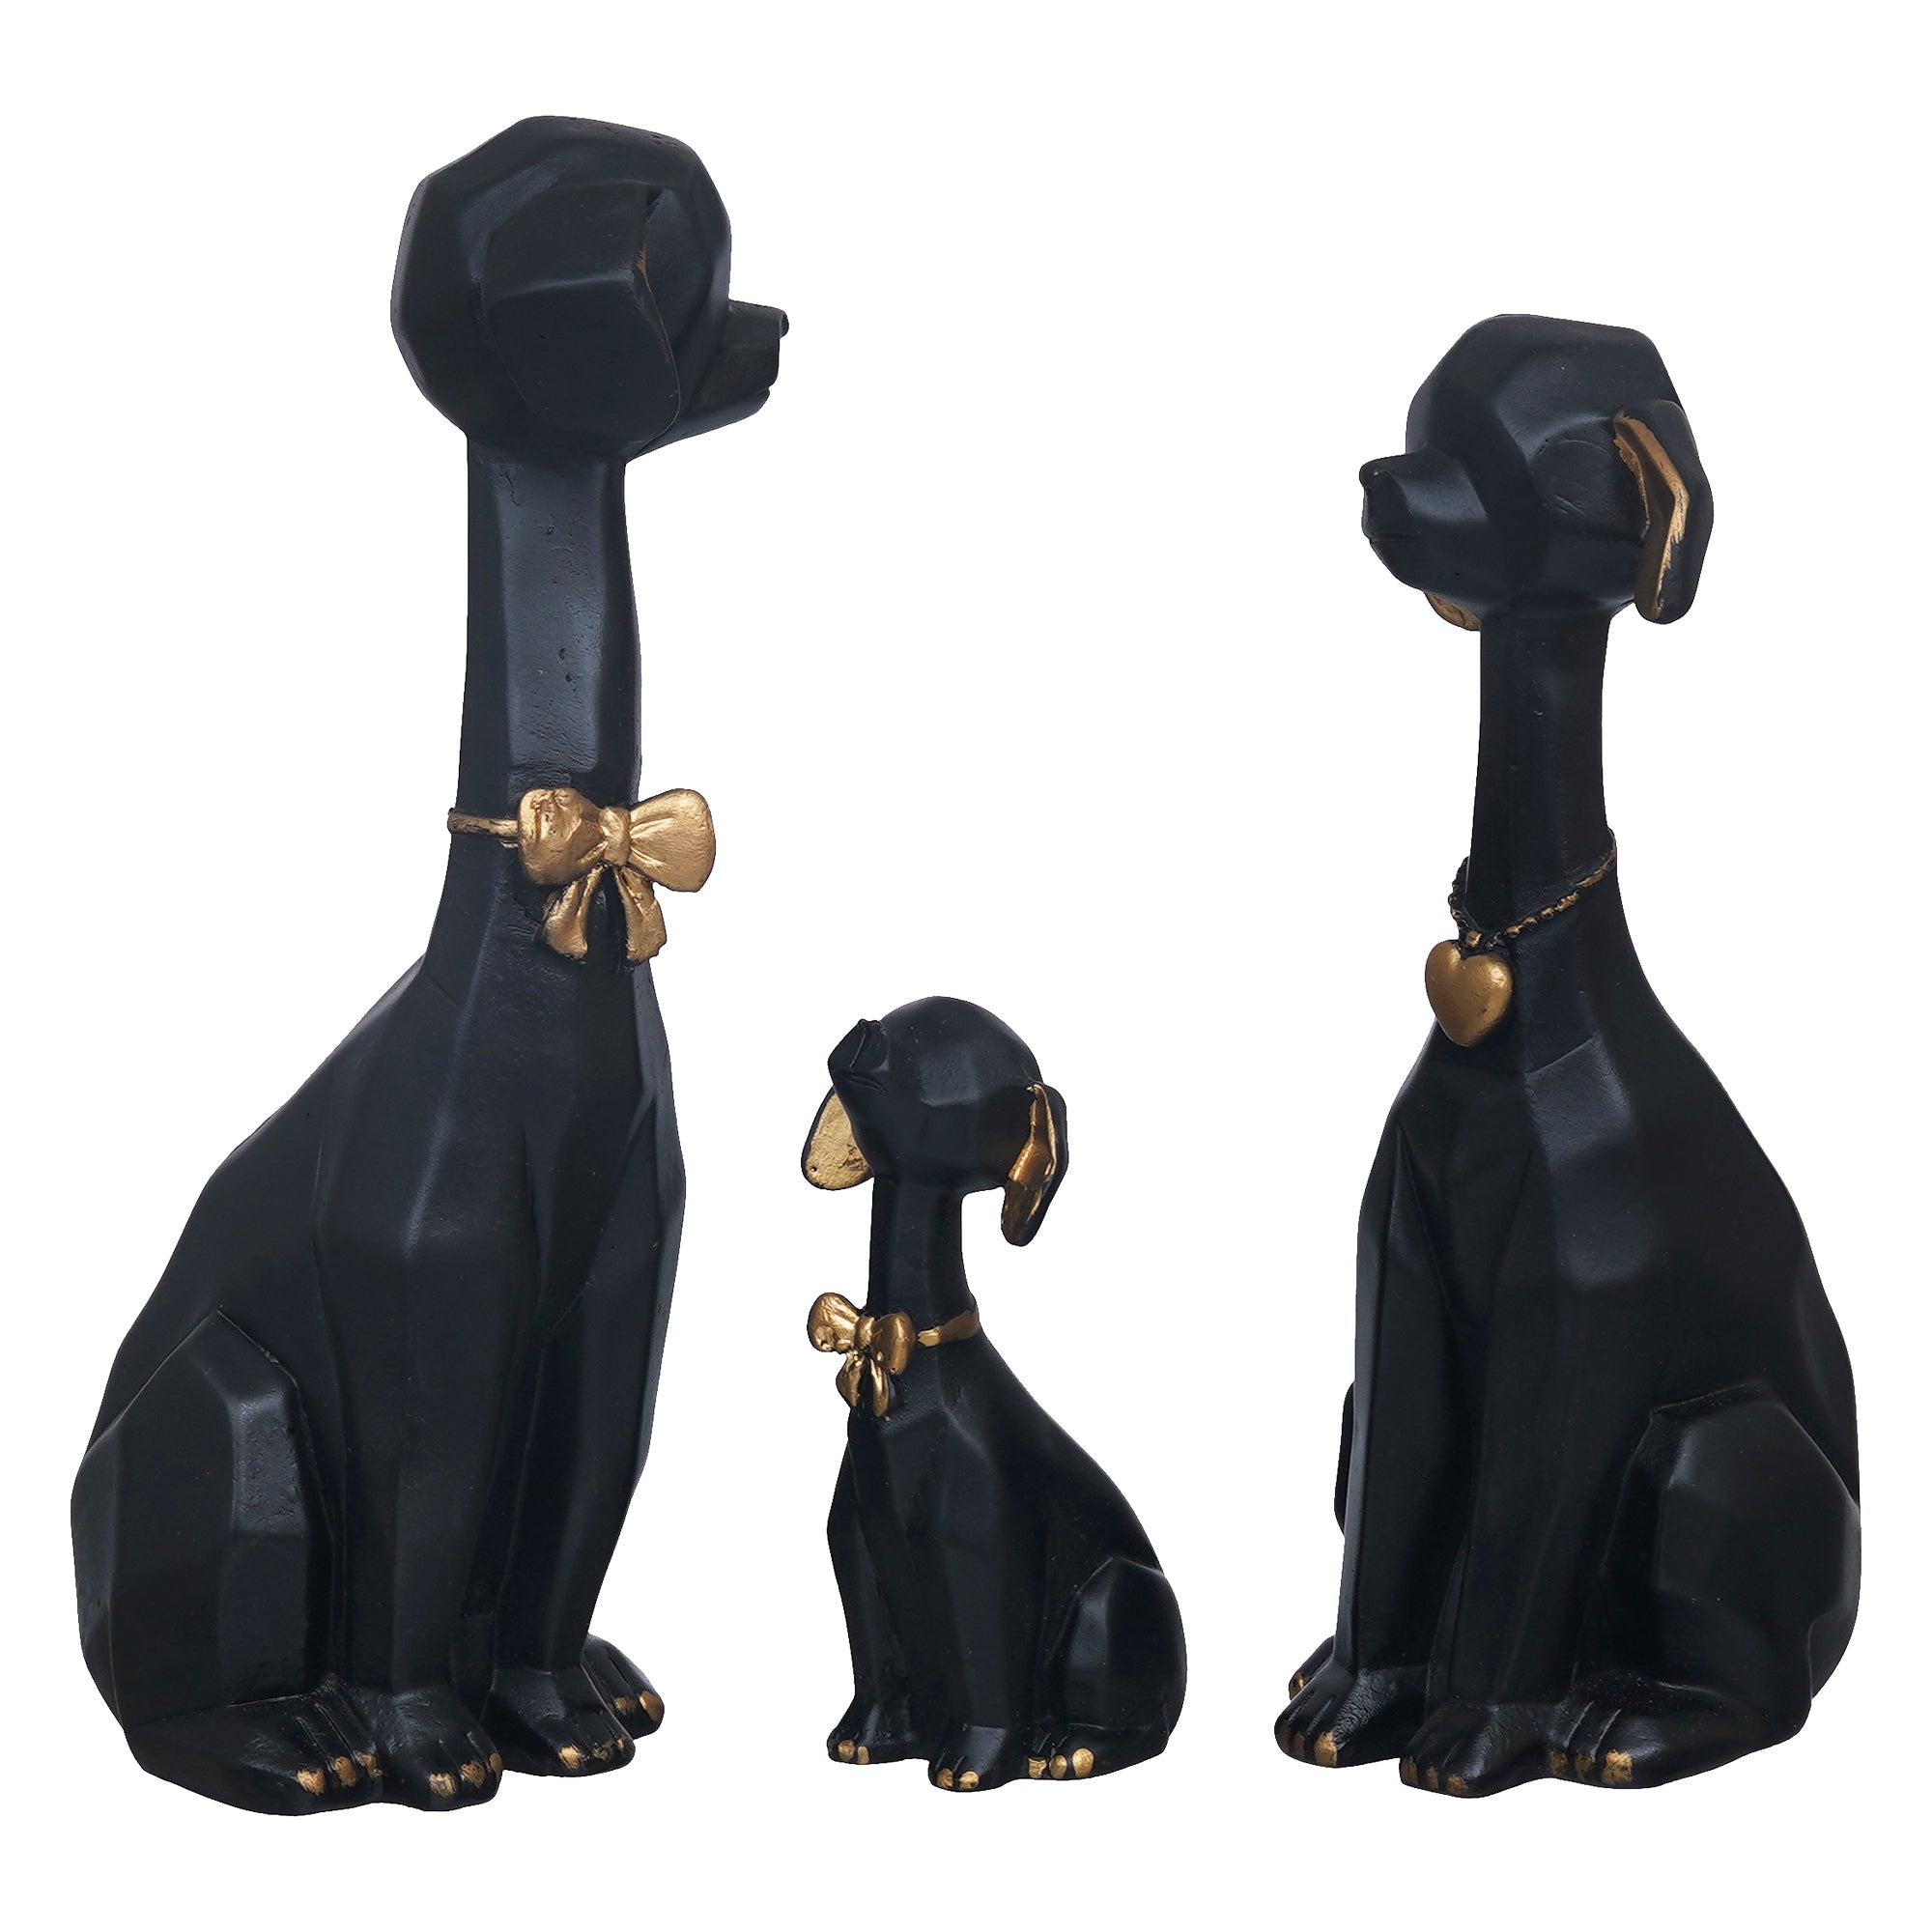 eCraftIndia Black and Golden Set of 3 Cute Dog Statues Animal Figurines Decorative Showpieces for Home Decor 6